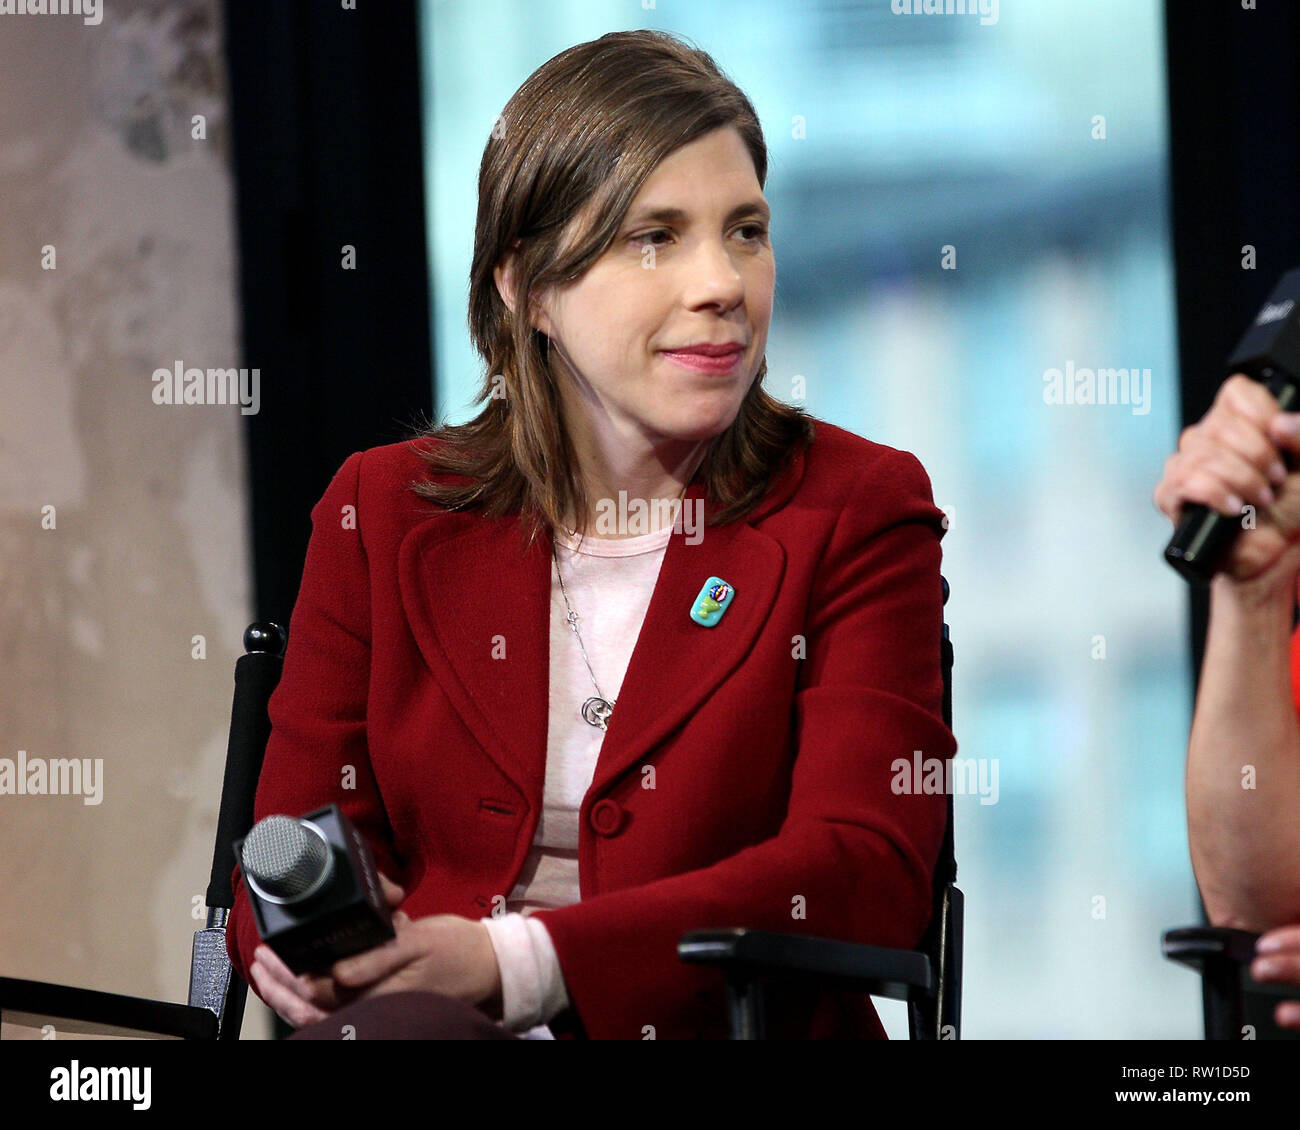 New York, USA. 05 Apr, 2016. Managing Editor, Variety, Cynthia Littleton at The Tuesday, Apr 5, 2016 AOL BUILD Series discussing 'What I Told My Daughter: Lessons From Leaders On Raising The Next Generation Of Empowered Women' at AOL Studios In New York in New York, USA. Credit: Steve Mack/S.D. Mack Pictures/Alamy Stock Photo